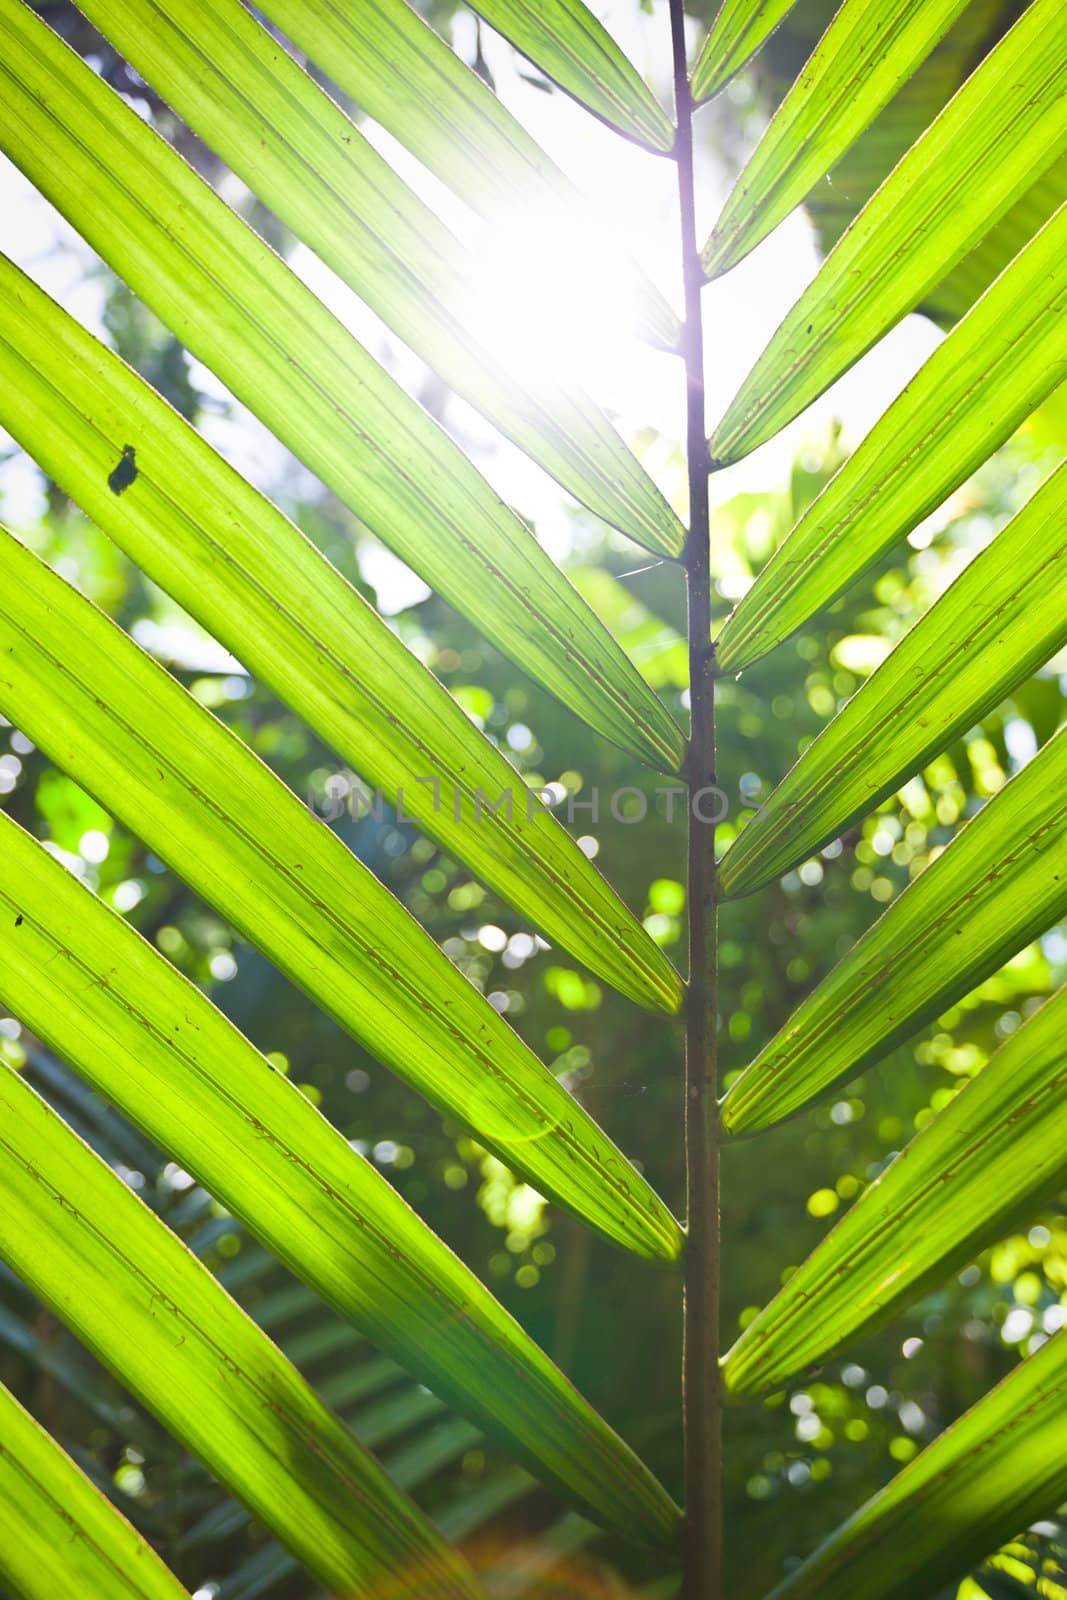 Viewing the bright glare of a tropical sun through an upright fresh green palm frond